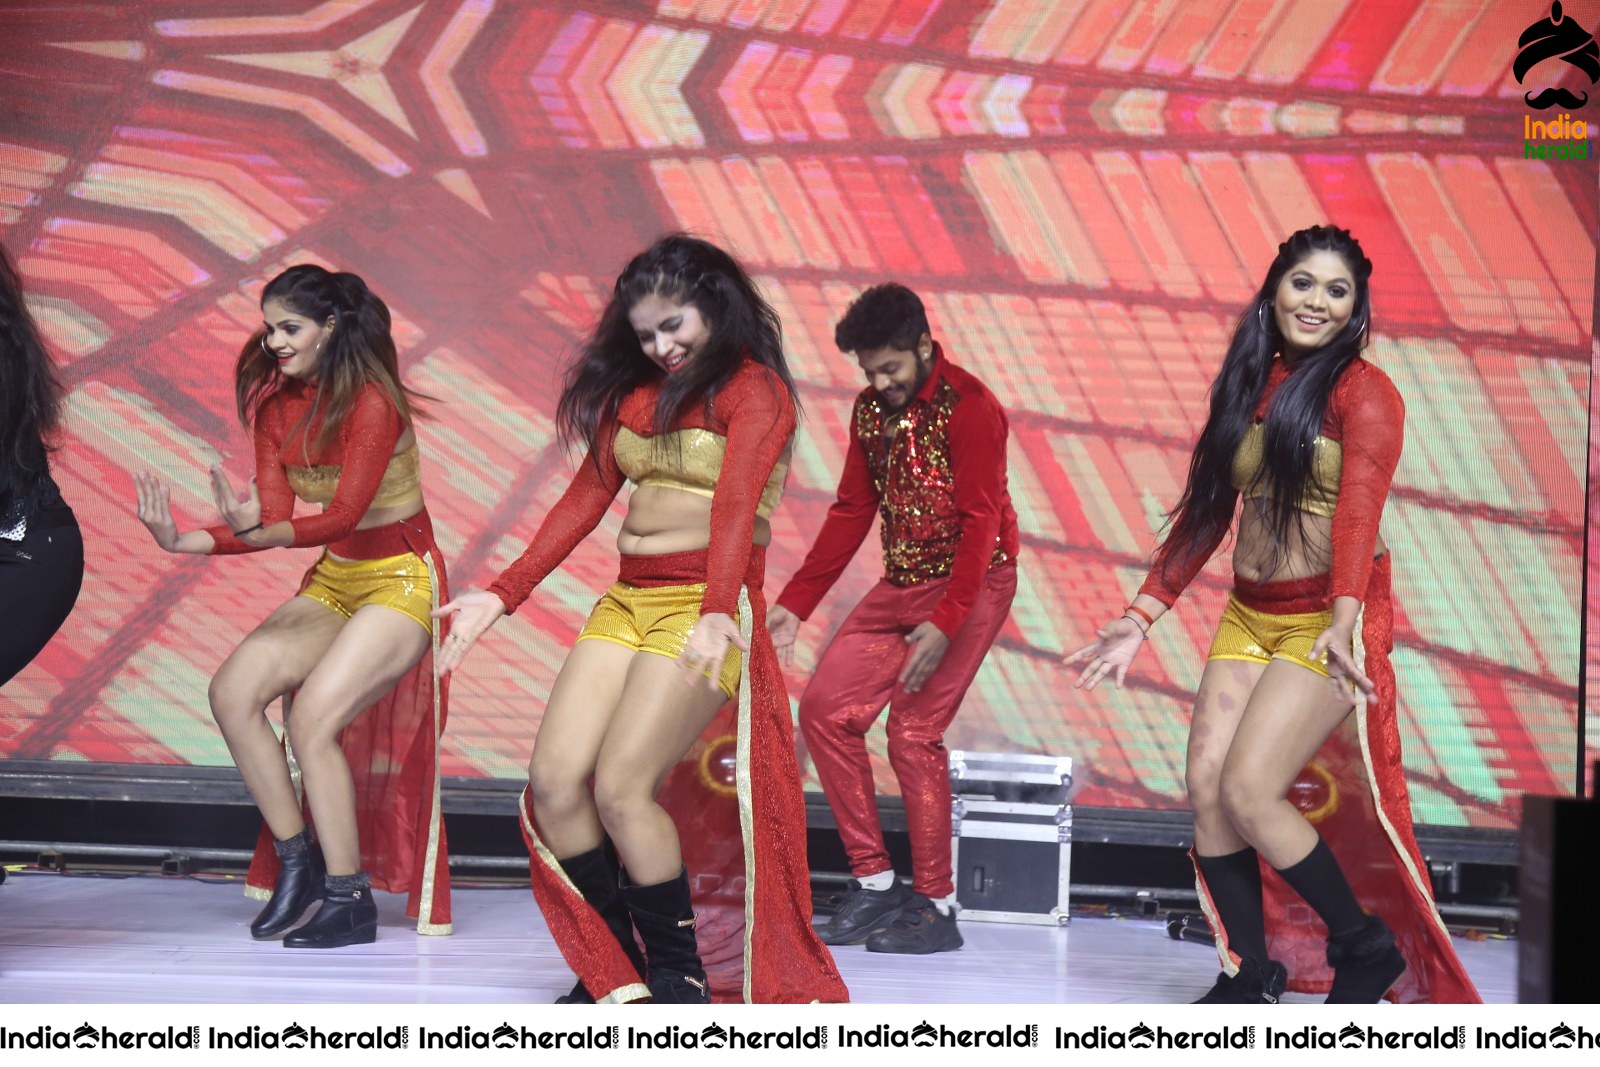 Hot Dance on the stage by Dancers at Dabangg 3 Event Set 1